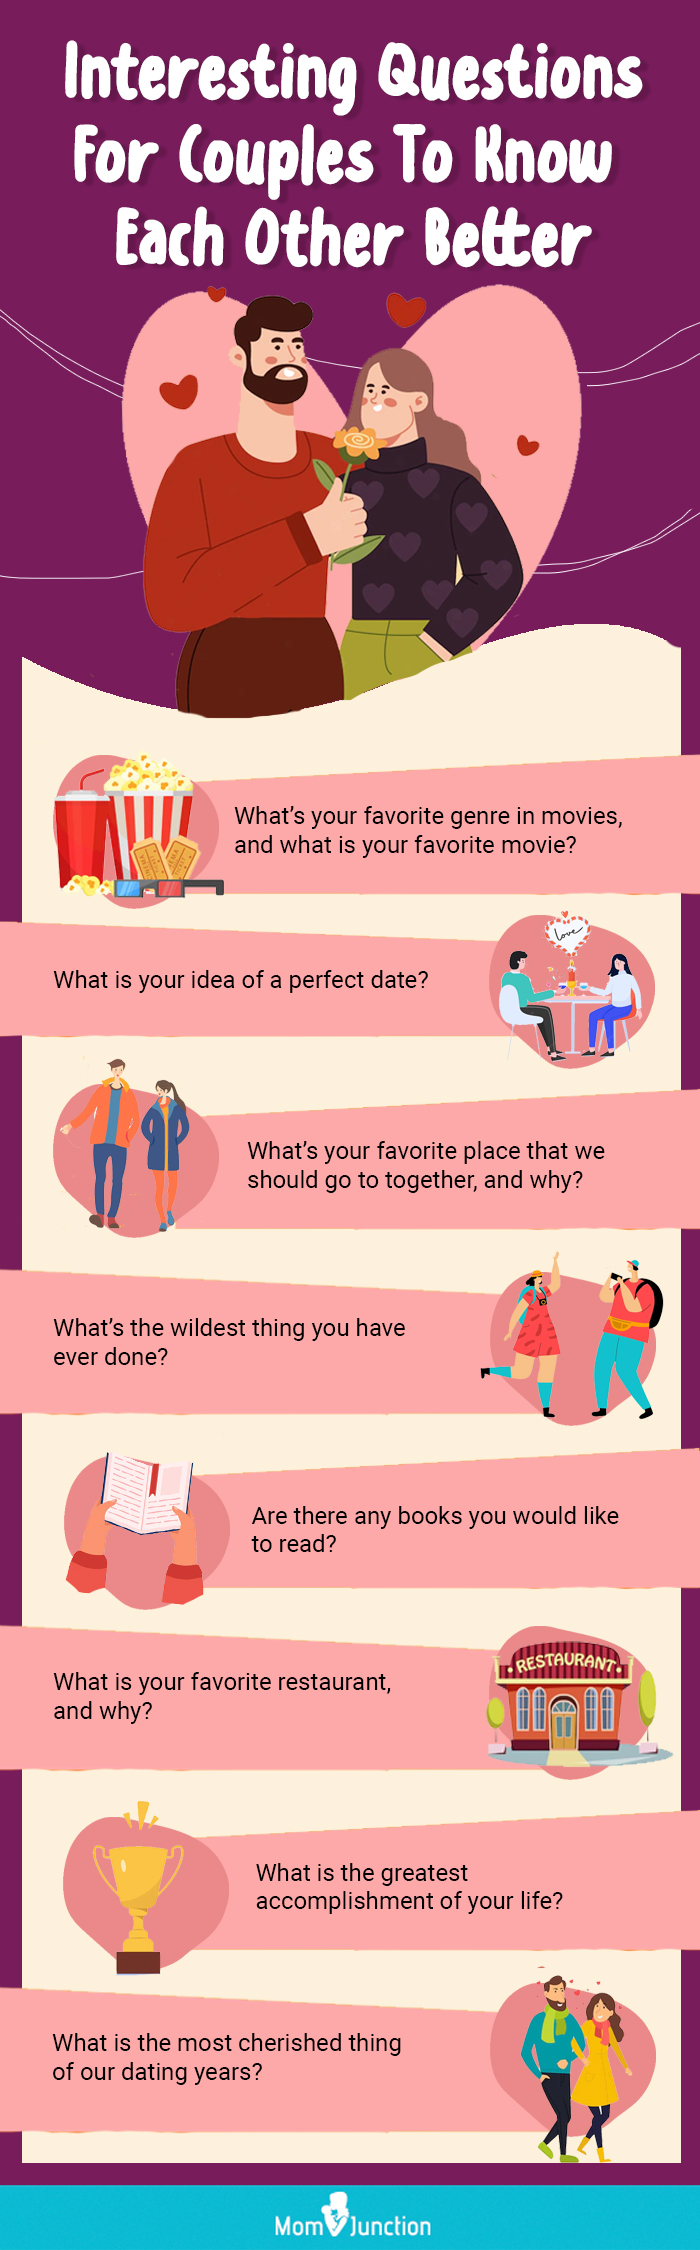 150+ Questions To Ask Your Girlfriend To Deepen Your Bond, game to